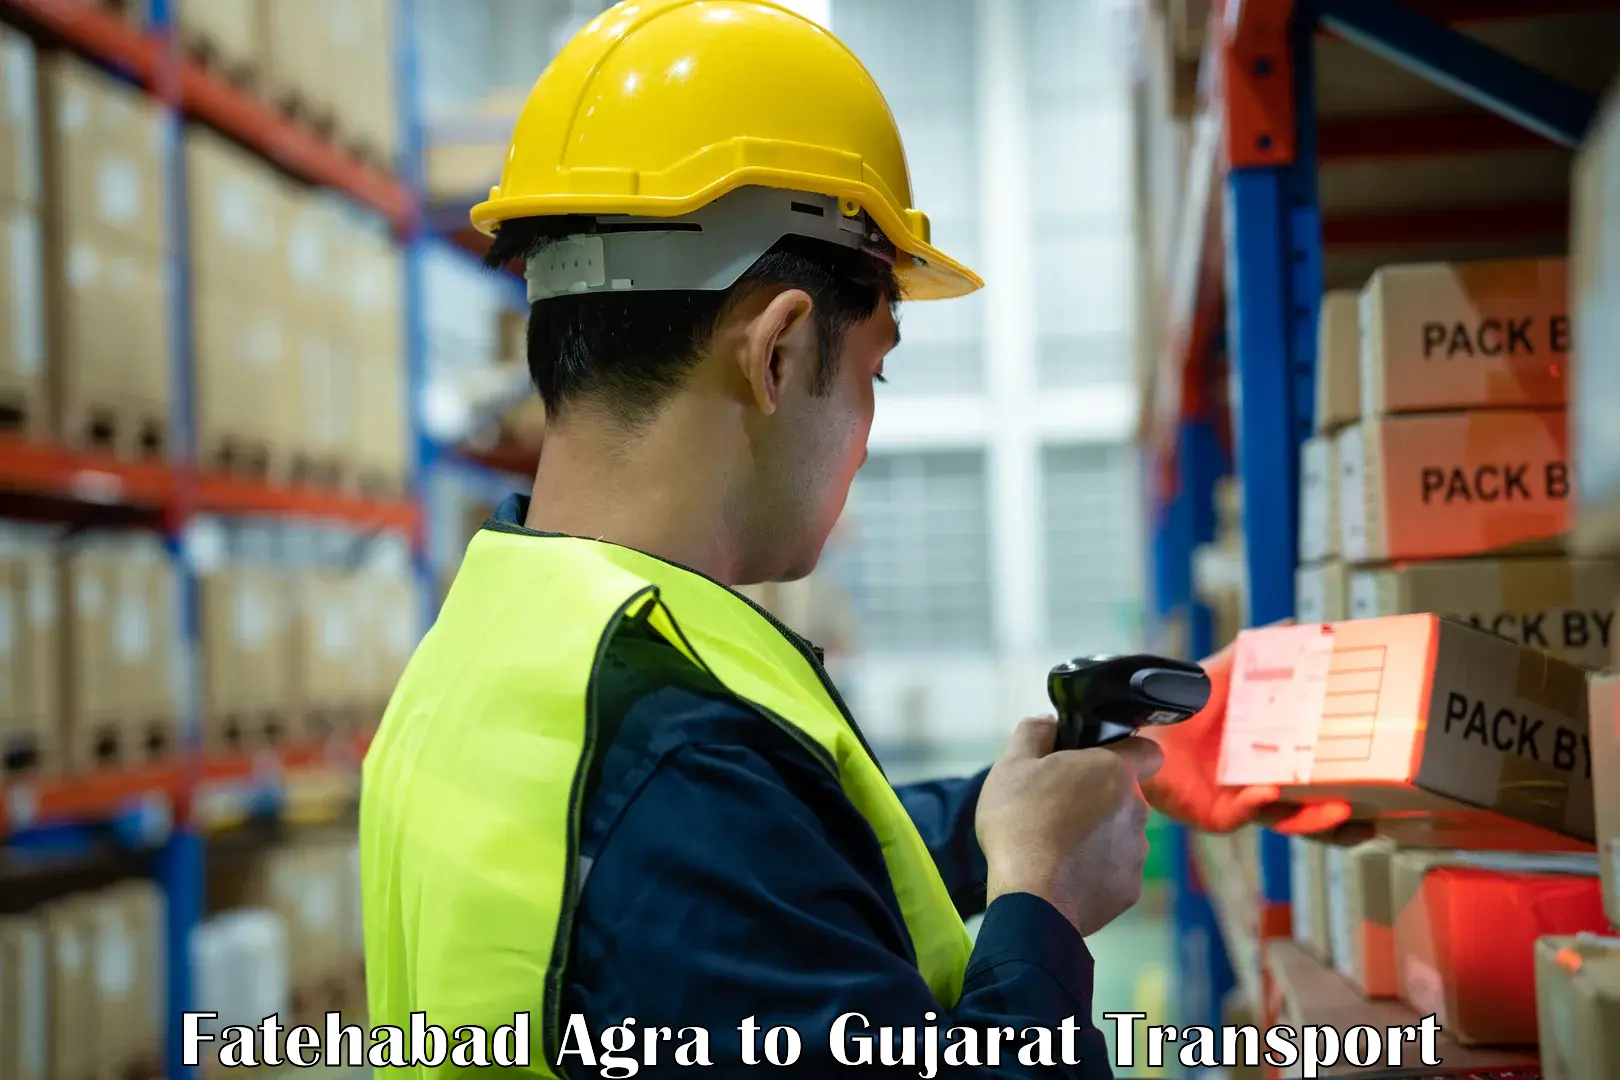 Part load transport service in India Fatehabad Agra to Girgadhada